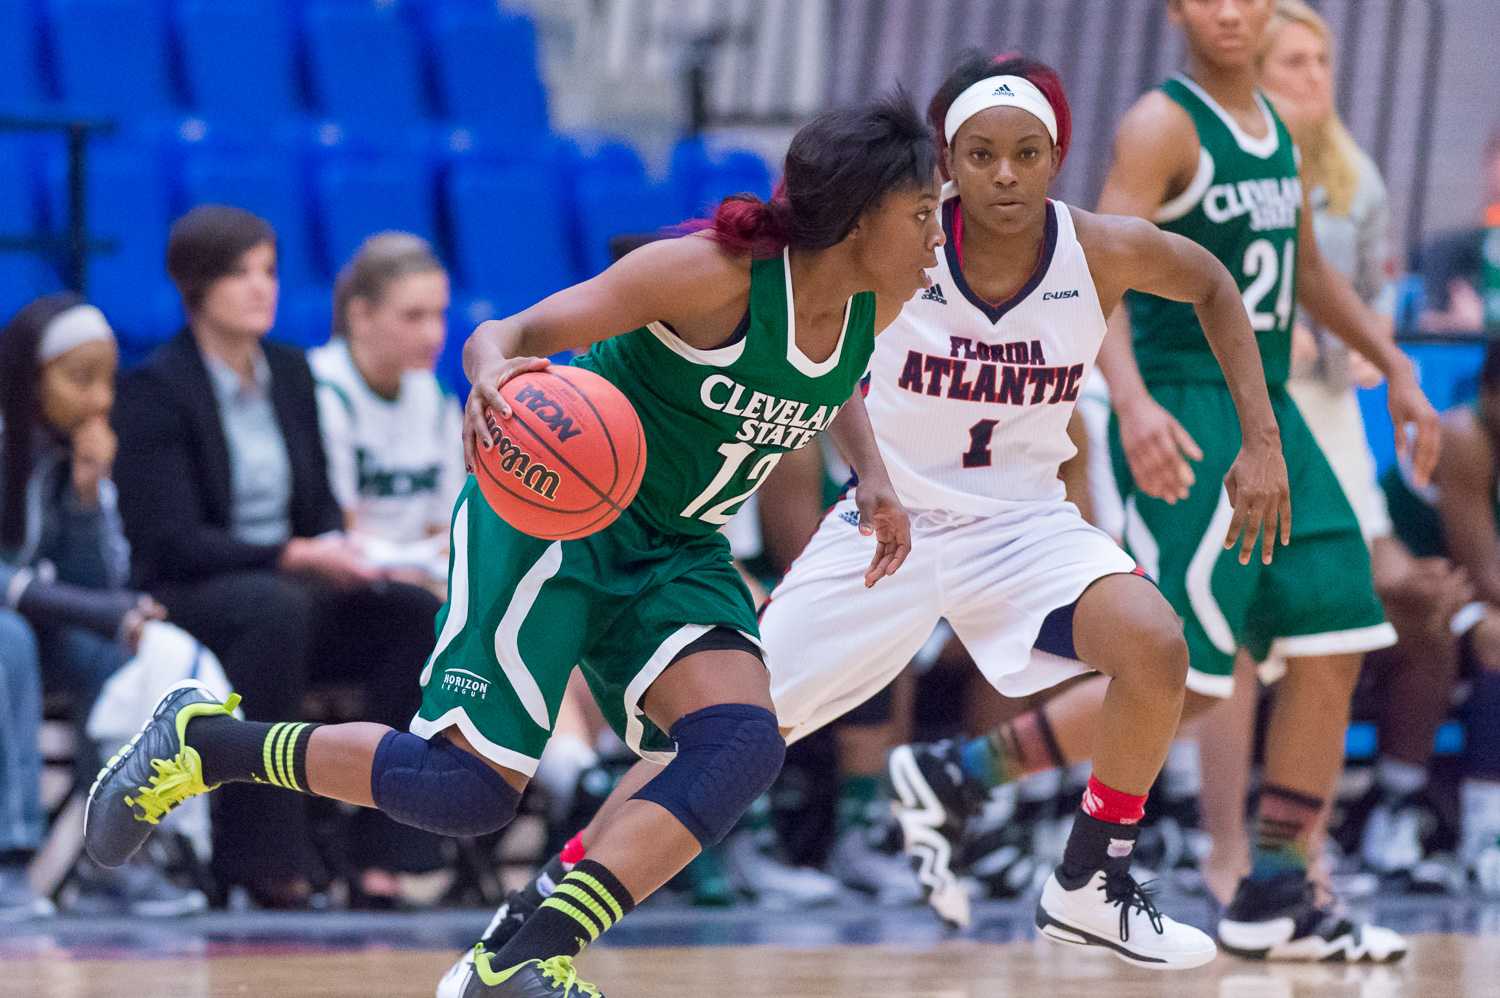 Cleveland guard Brooke Smith attempts to make it past FAU guard Aaliyah Dotson to get to the basket.